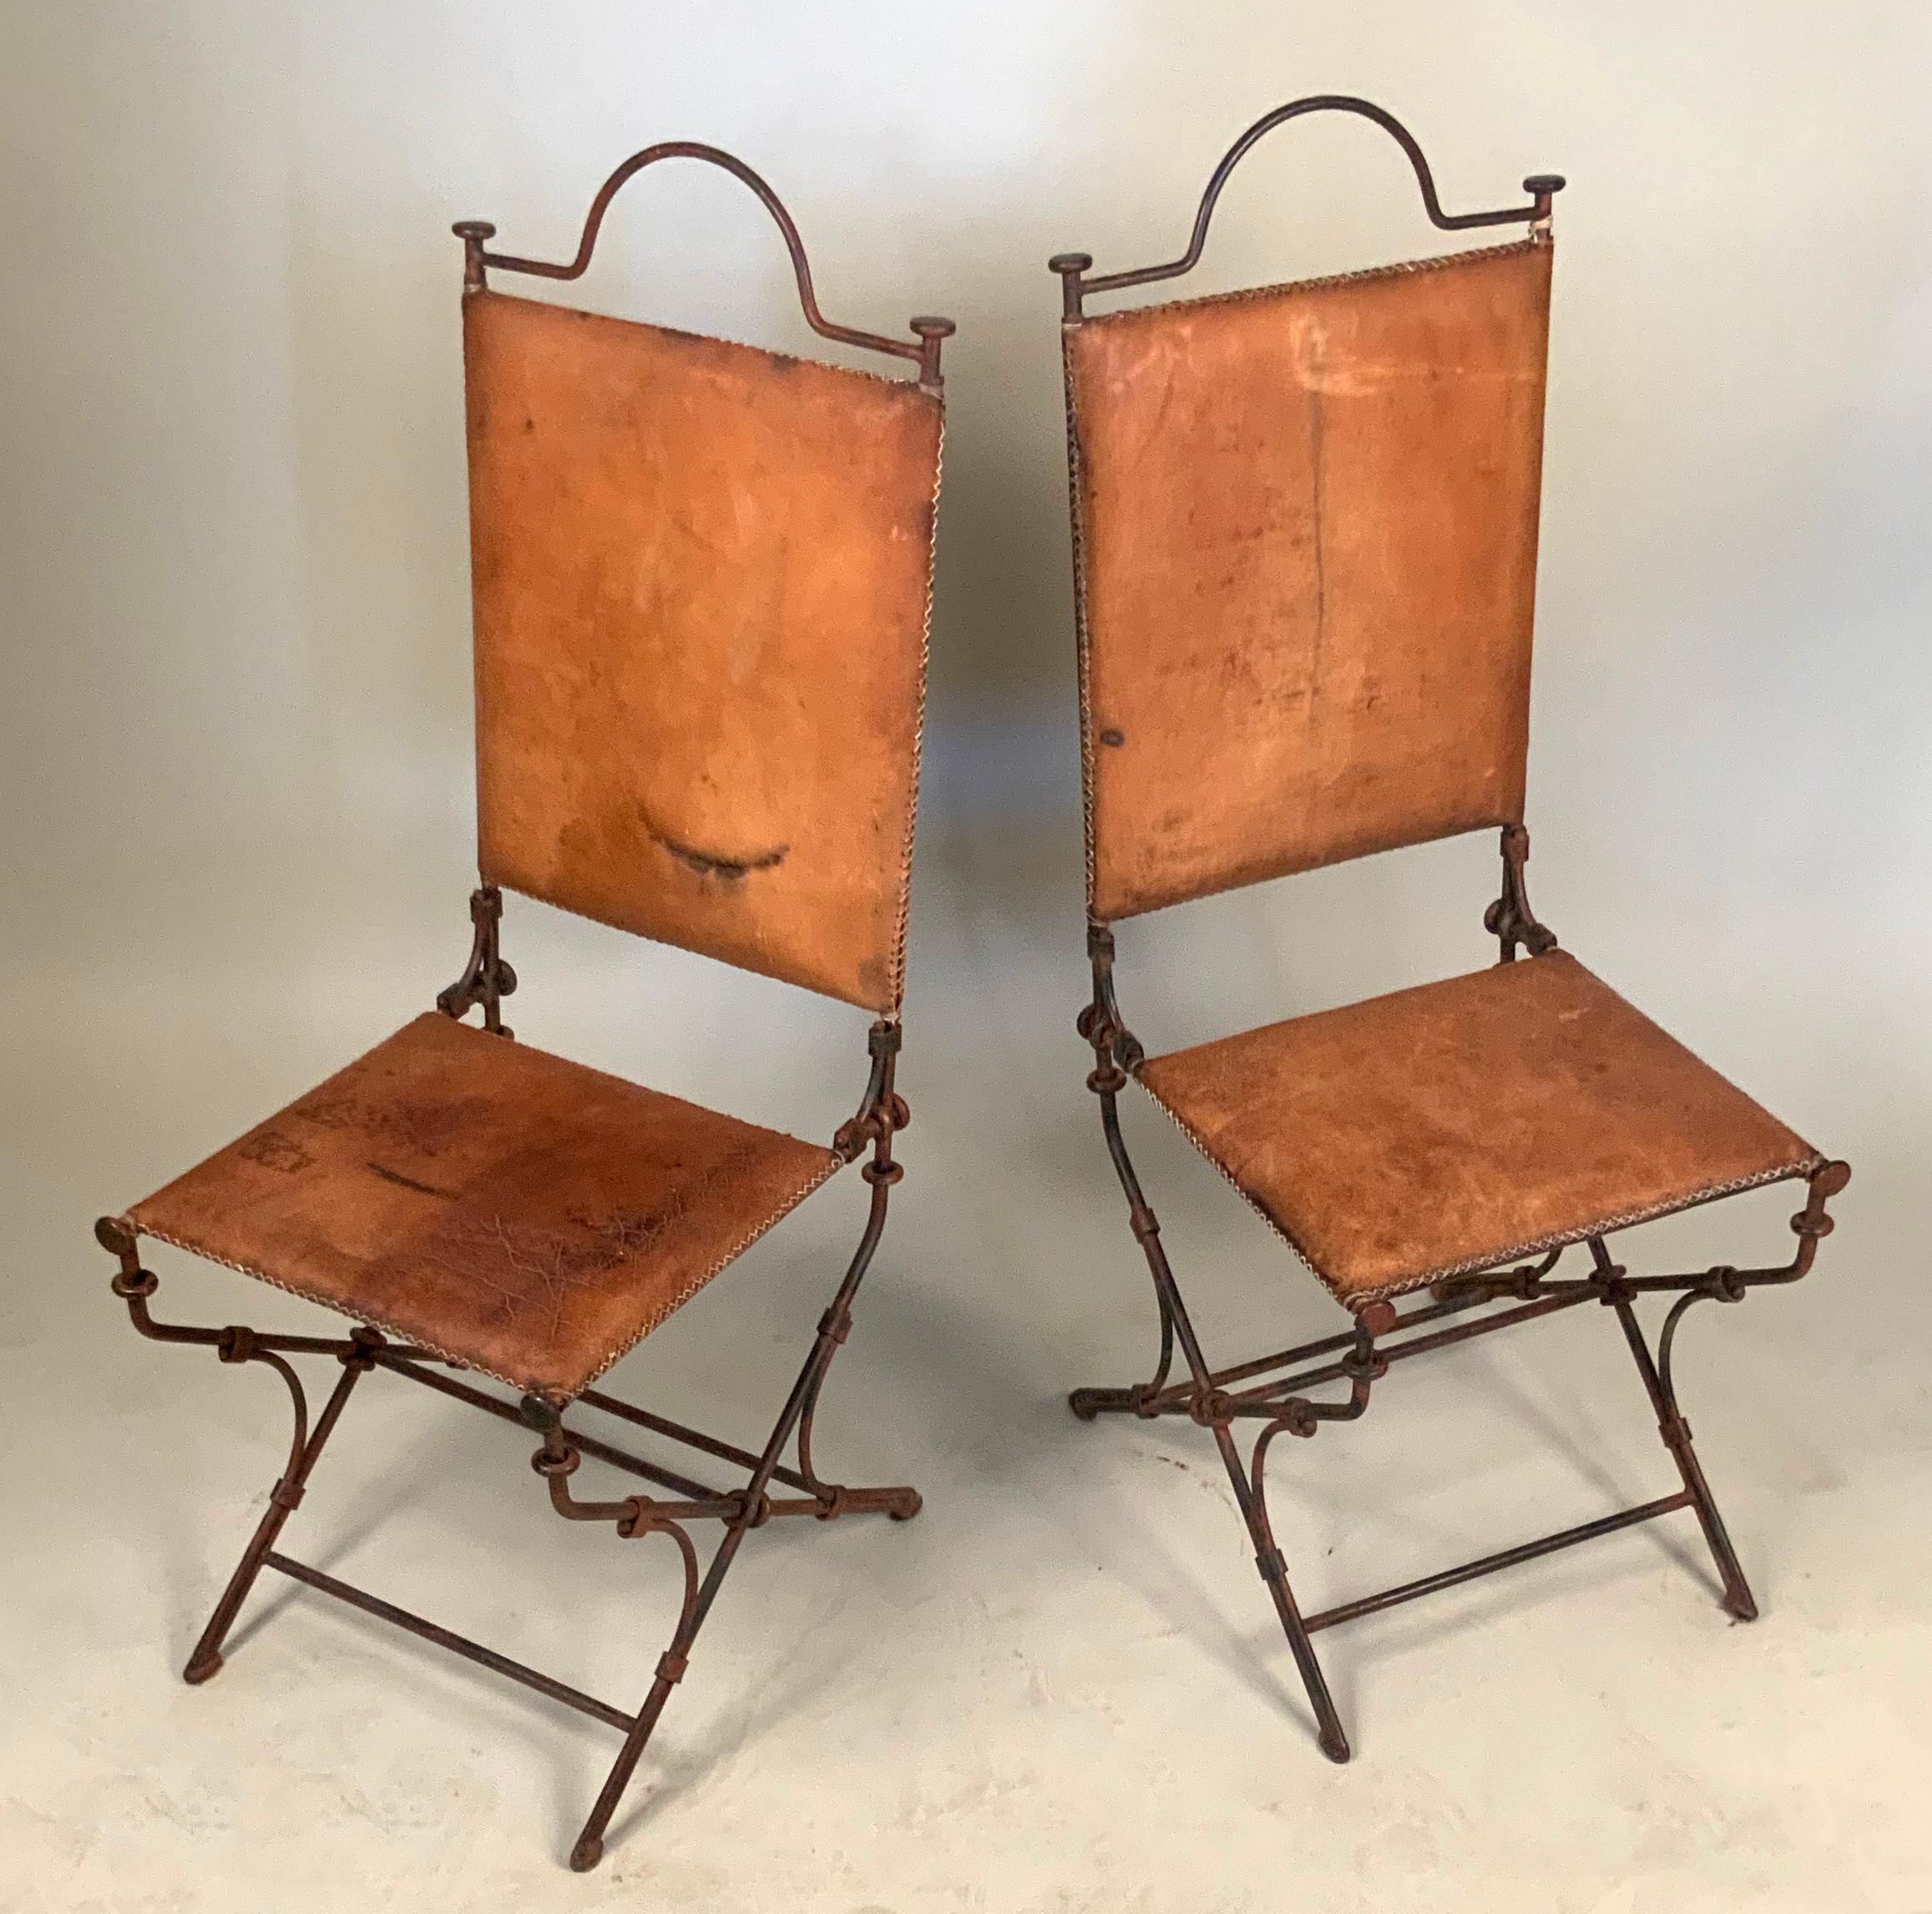 A very handsome pair of vintage high back chairs designed by Ilana Goor, with wrought iron frames and leather seats and backs. Beautiful design and details, and very well made.